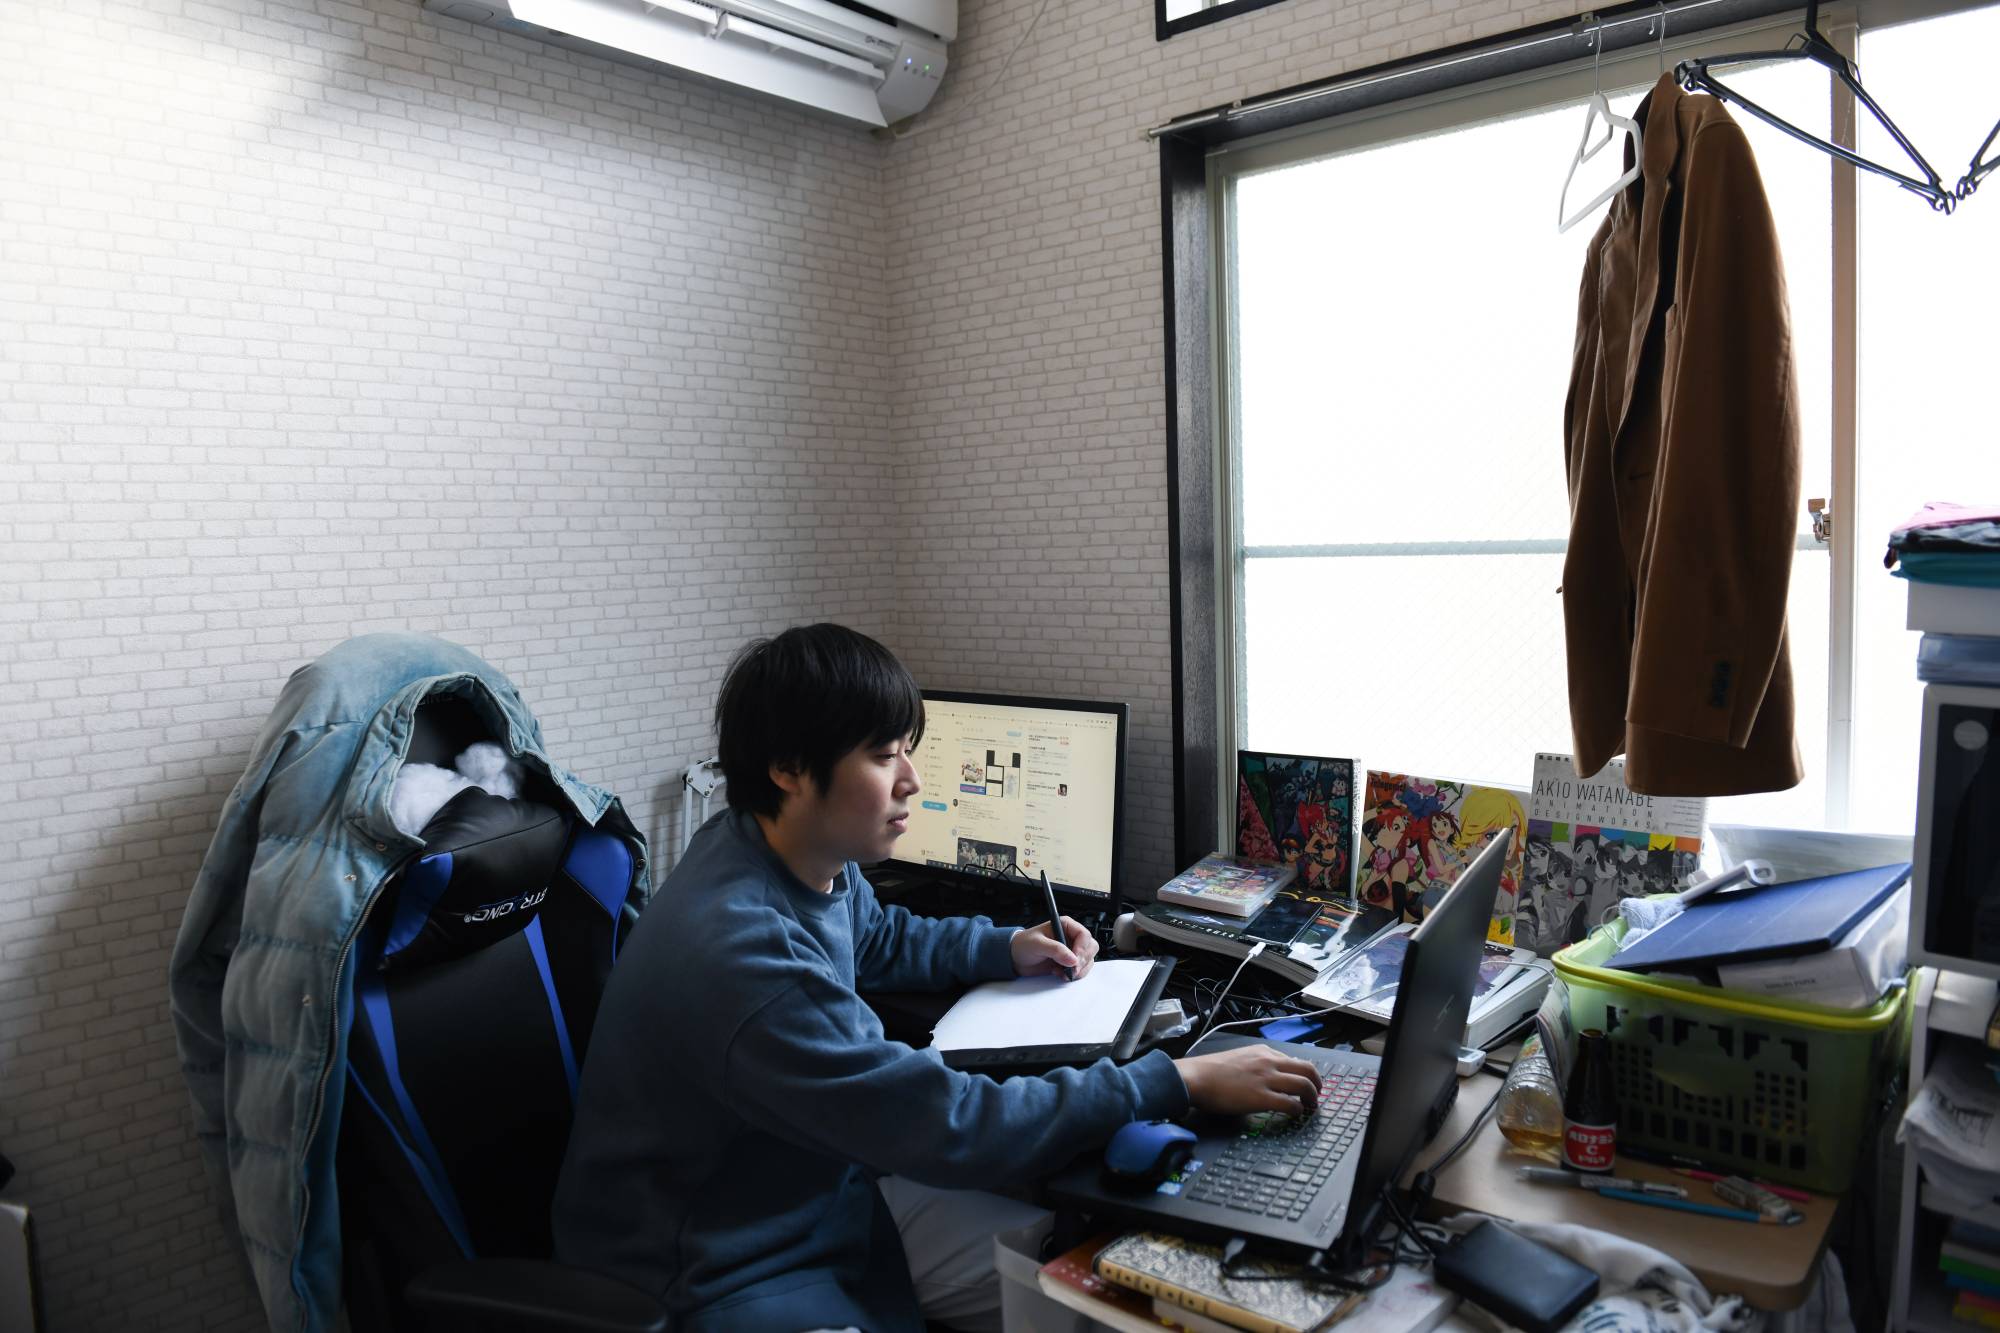 Tetsuya Akutsu, a freelance animator, at work in his apartment in Tokyo on Jan. 14. Akutsu wants to start a family, but on his wages, he says, 'it’s impossible to get married and to raise a child.' | NORIKO HAYASHI/THE NEW YORK TIMES